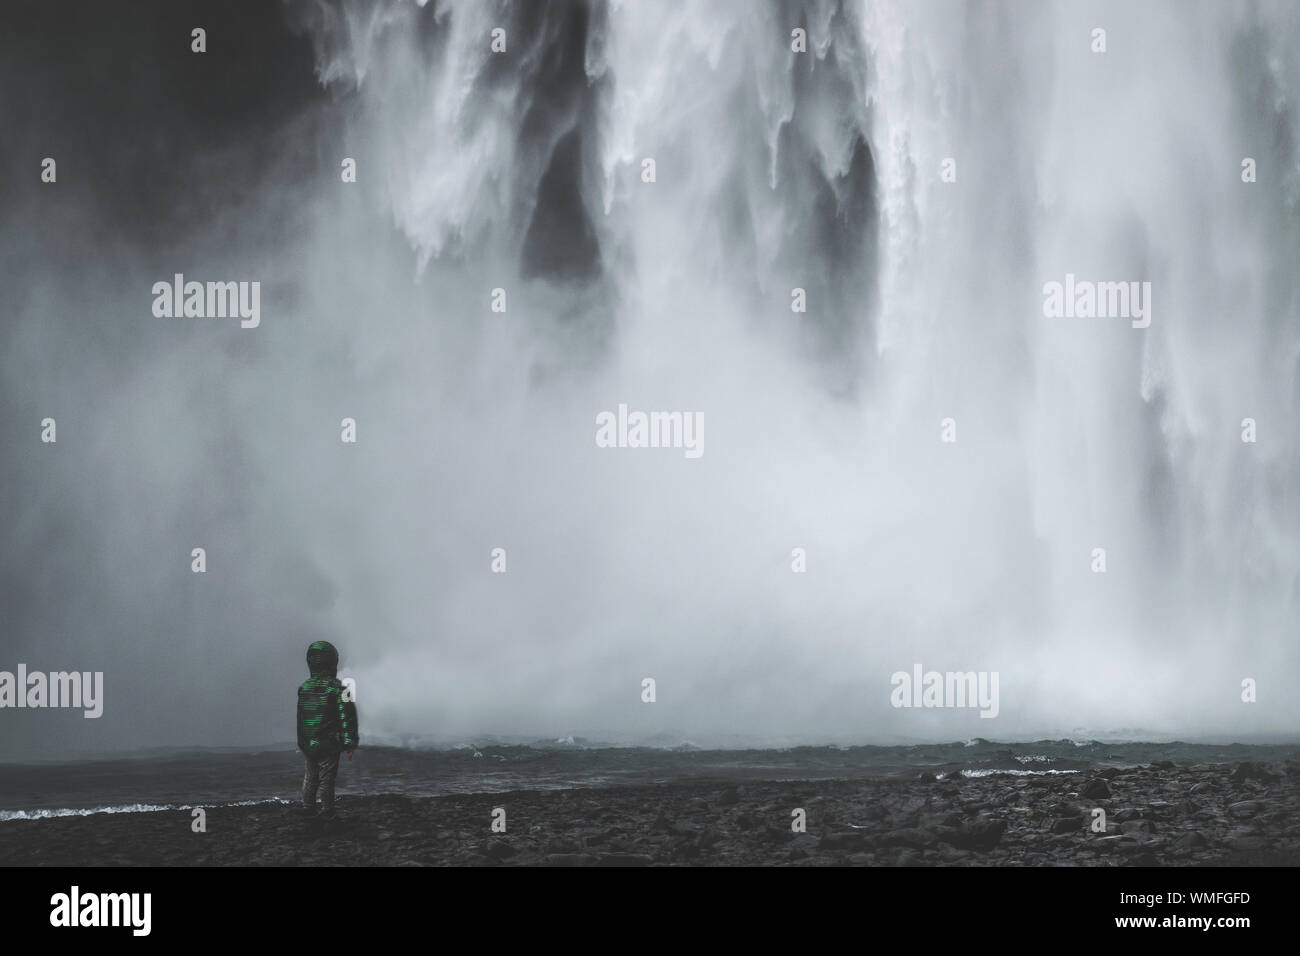 Silhouette Child Standing Against Waterfall Stock Photo